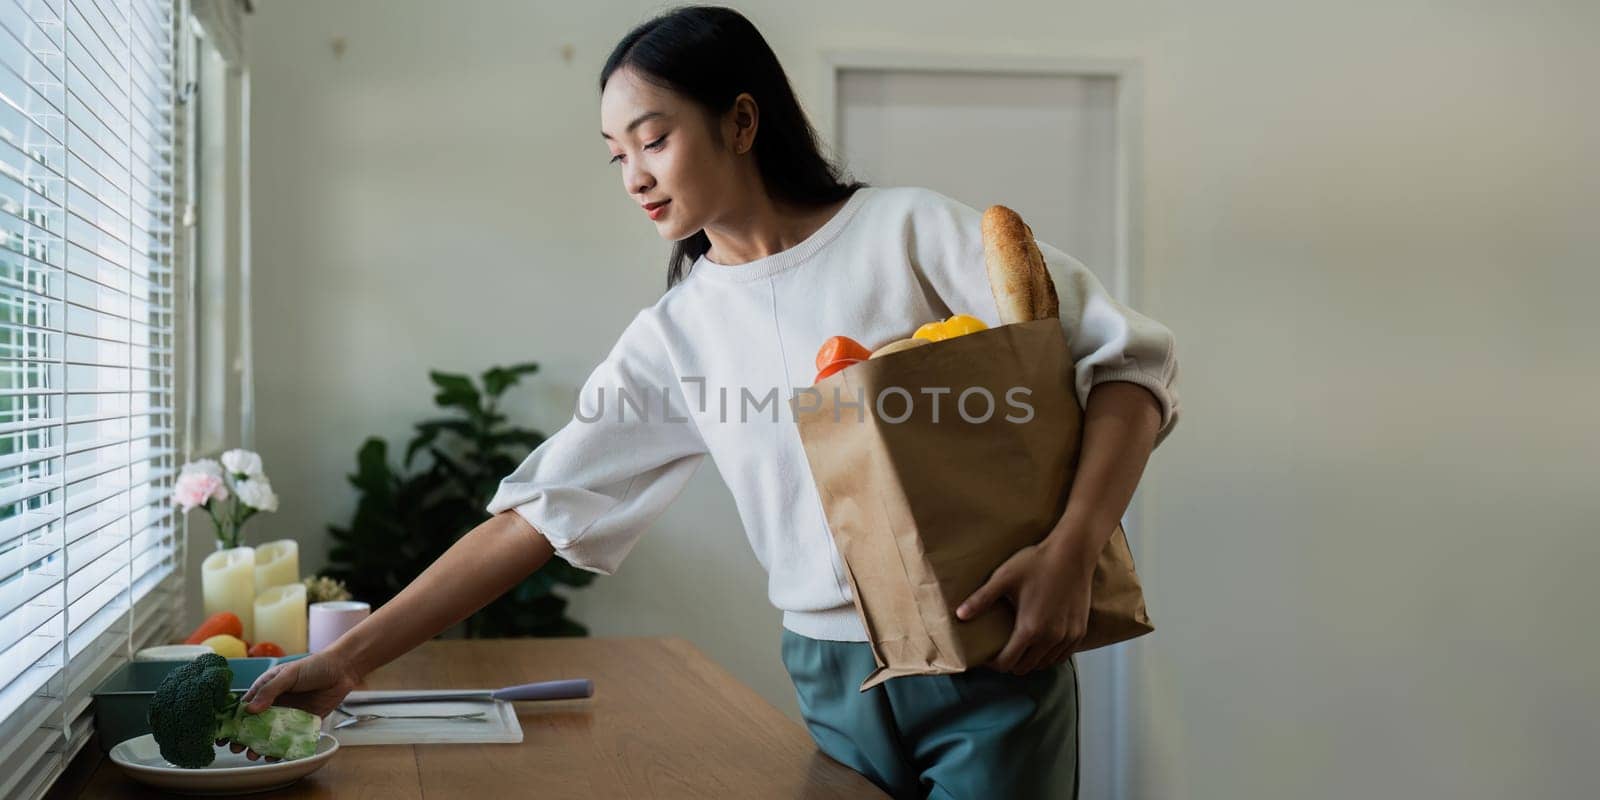 Organic Food Delivery. Happy young woman unpacking bag with Fresh Vegetables in kitchen.